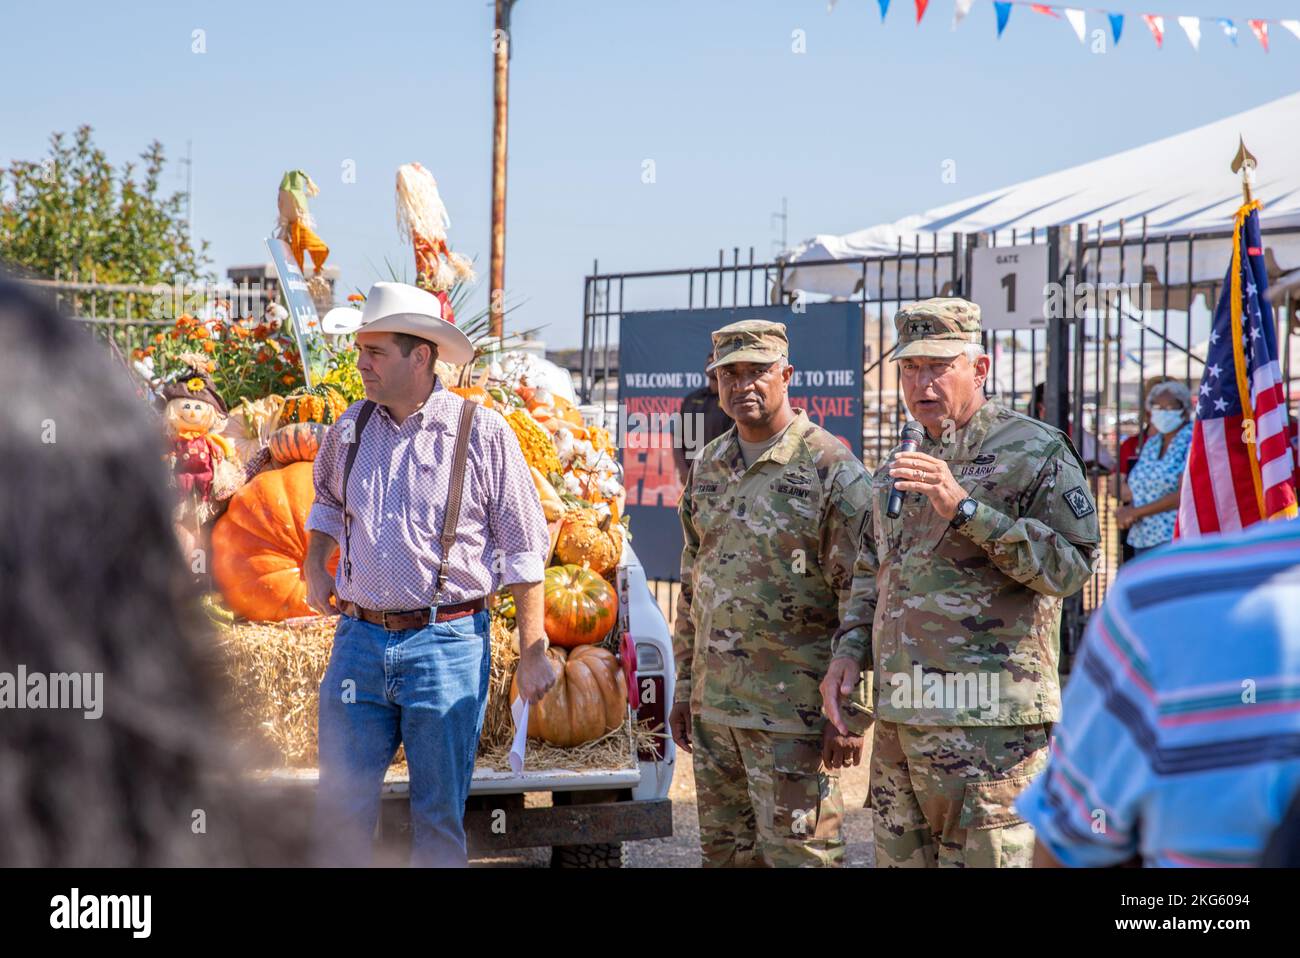 Commissioner Andy Gibson (right), Mississippi’s eighth Commissioner of Agriculture and Commerce, stands with Command Sgt. Maj. Silvester Tatum, senior enlisted leader of the Mississippi National Guard, and Maj. Gen. Janson D. Boyles, the adjutant general of Mississippi, while he speaks to a crowd outside of the Mississippi Fairgrounds in Jackson, Mississippi, Oct. 6, 2022. Members of the 41st Army Band, Mississippi Army National Guard, played the National Anthem at the Mississippi State Fair. (U.S. Army National Guard photos by Staff Sgt. Connie Jones) Stock Photo